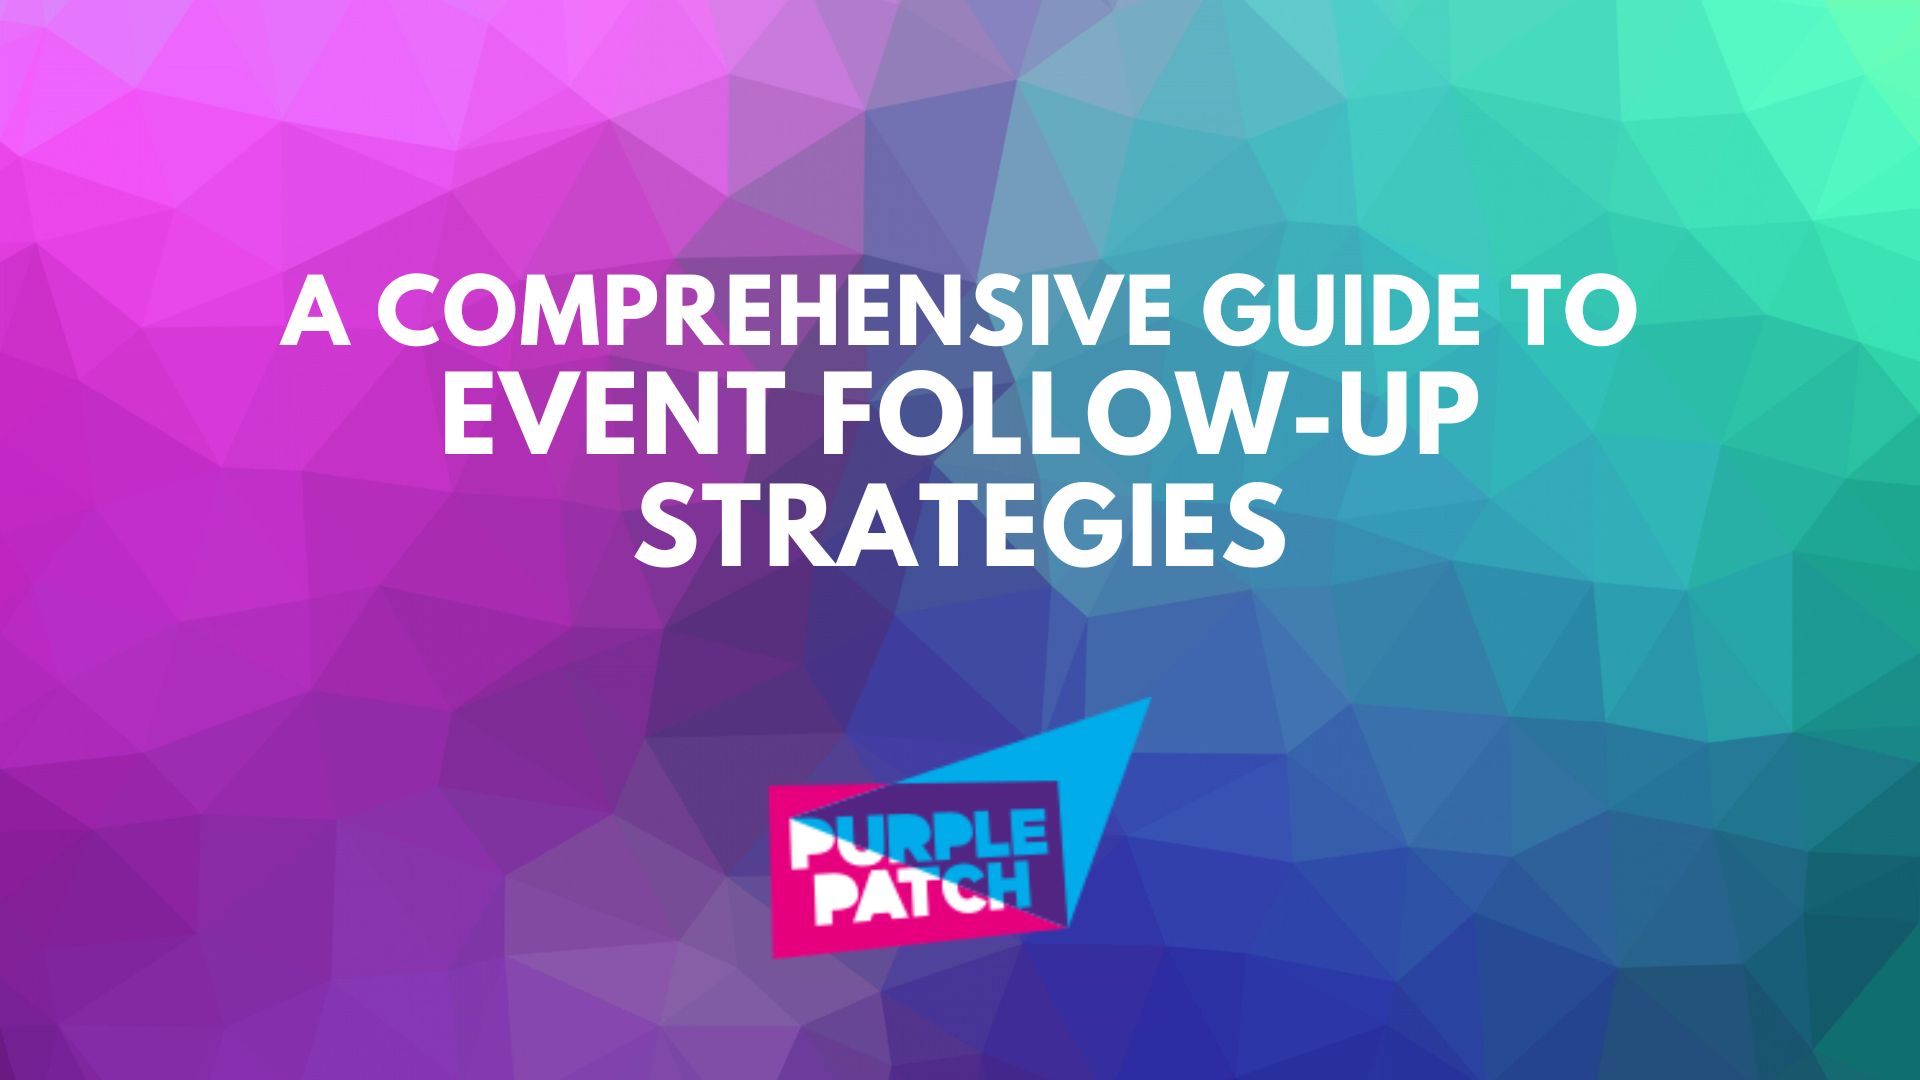 A Comprehensive Guide to Event Follow-Up Strategies